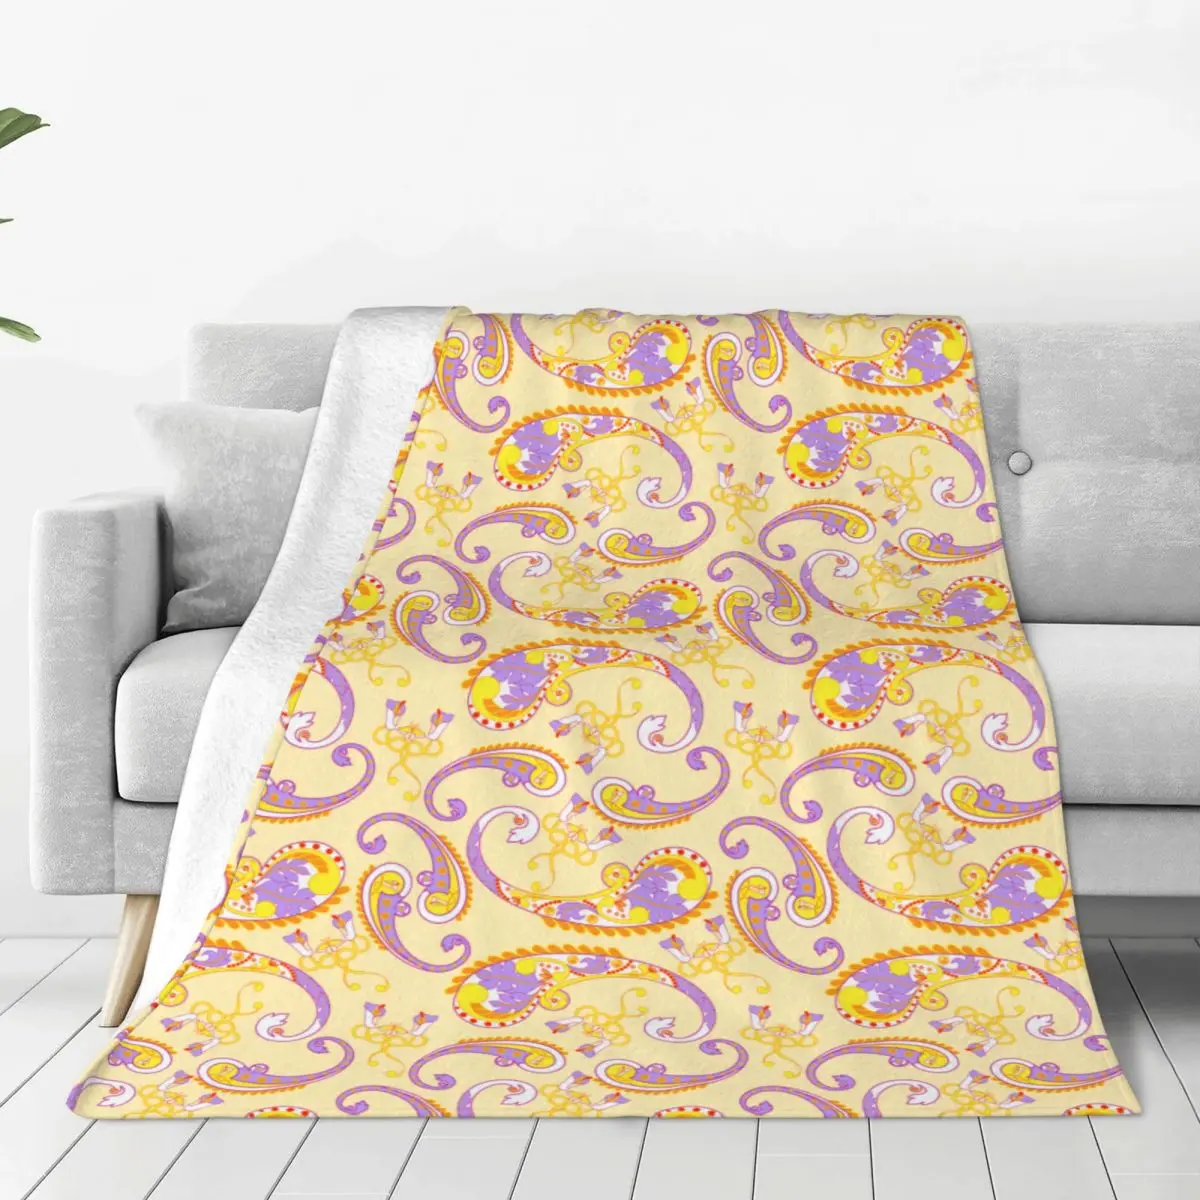 

Paisley Pattern Blanket Ultra Soft Cozy Blooming Flowers Decorative Flannel Blanket All Season For Home Couch Bed Chair Travel